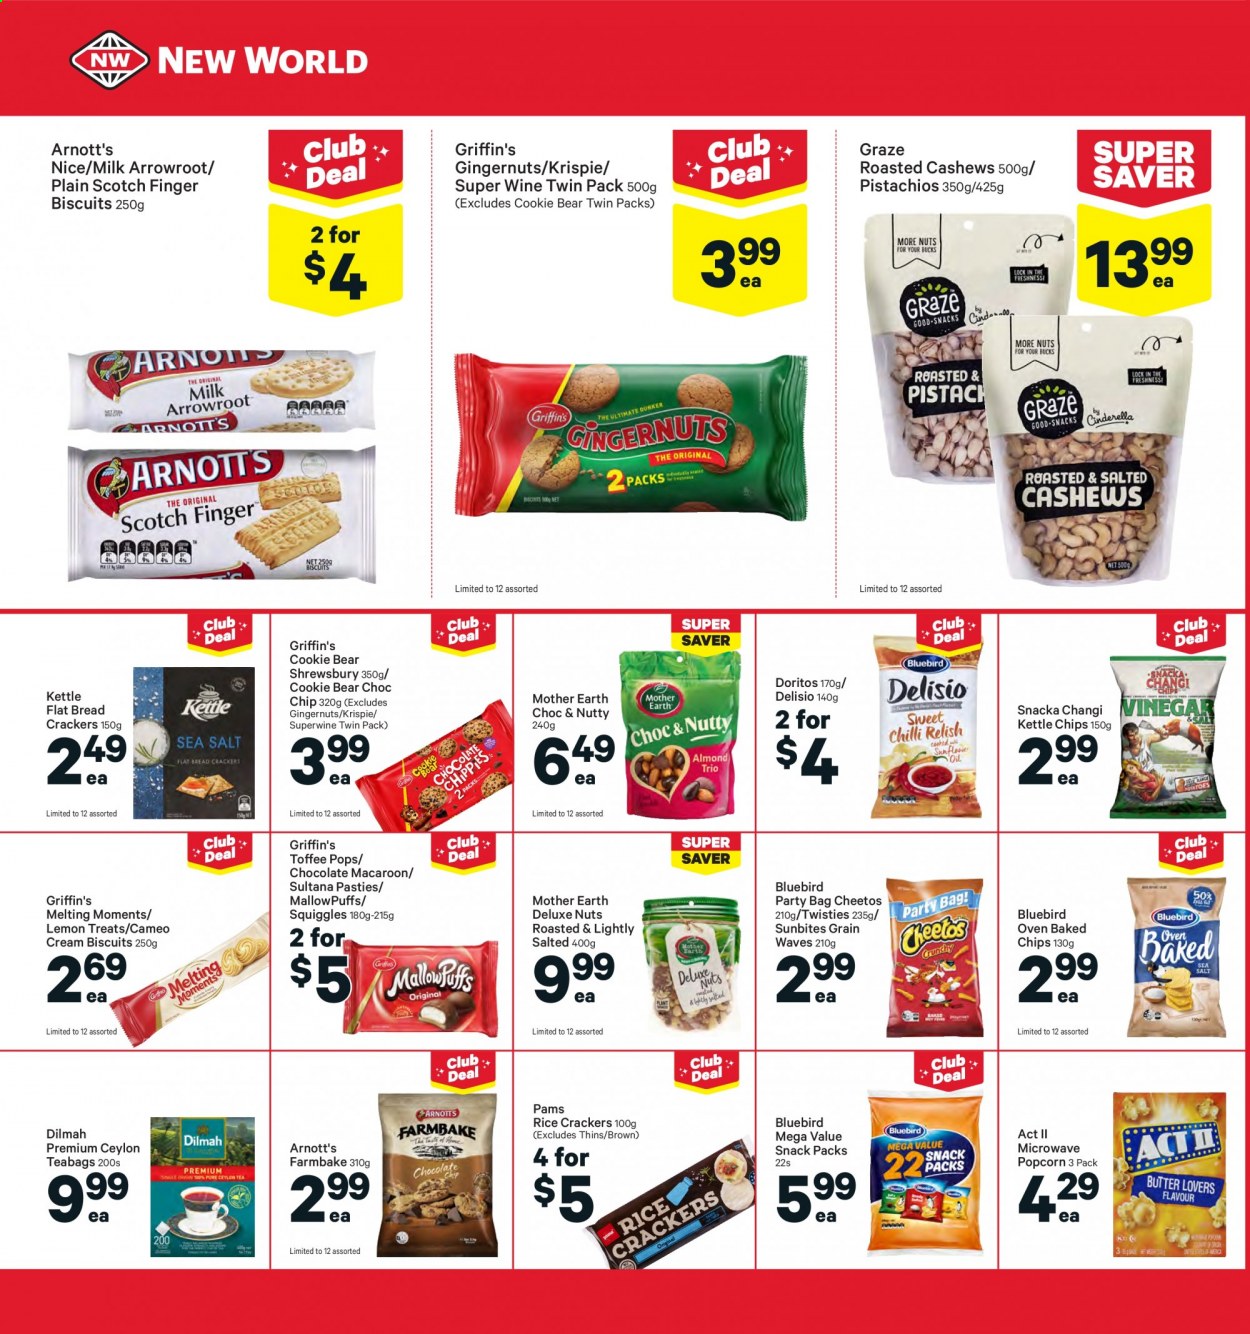 thumbnail - New World mailer - 12.07.2021 - 18.07.2021 - Sales products - bread, milk, chocolate, snack, toffee, crackers, biscuit, MallowPuffs, Griffin's, Mother Earth, Doritos, Cheetos, chips, Thins, Bluebird, popcorn, Delisio, Sunbites, rice crackers, cashews, pistachios, Graze, tea bags, wine. Page 16.